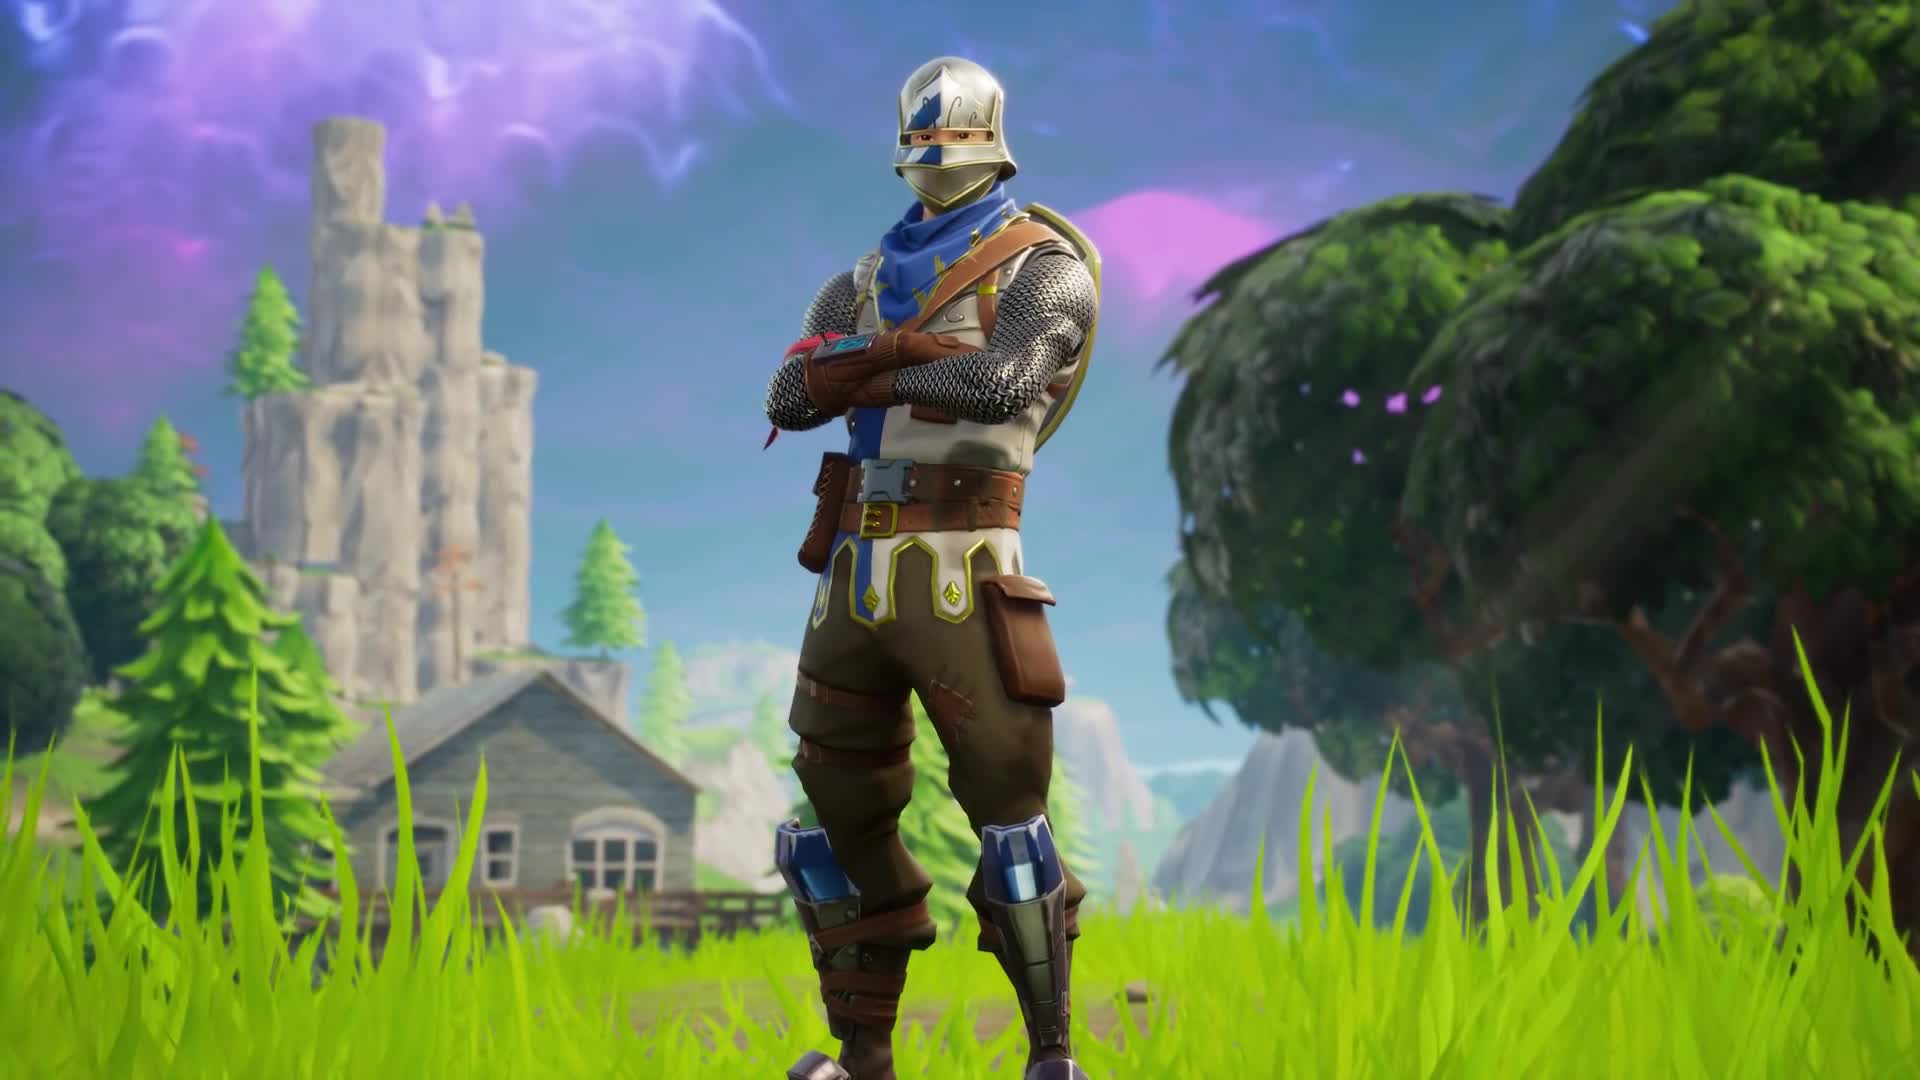 Fortnite Pay to Win Was Almost A Possibility, Battle Royale Took Two